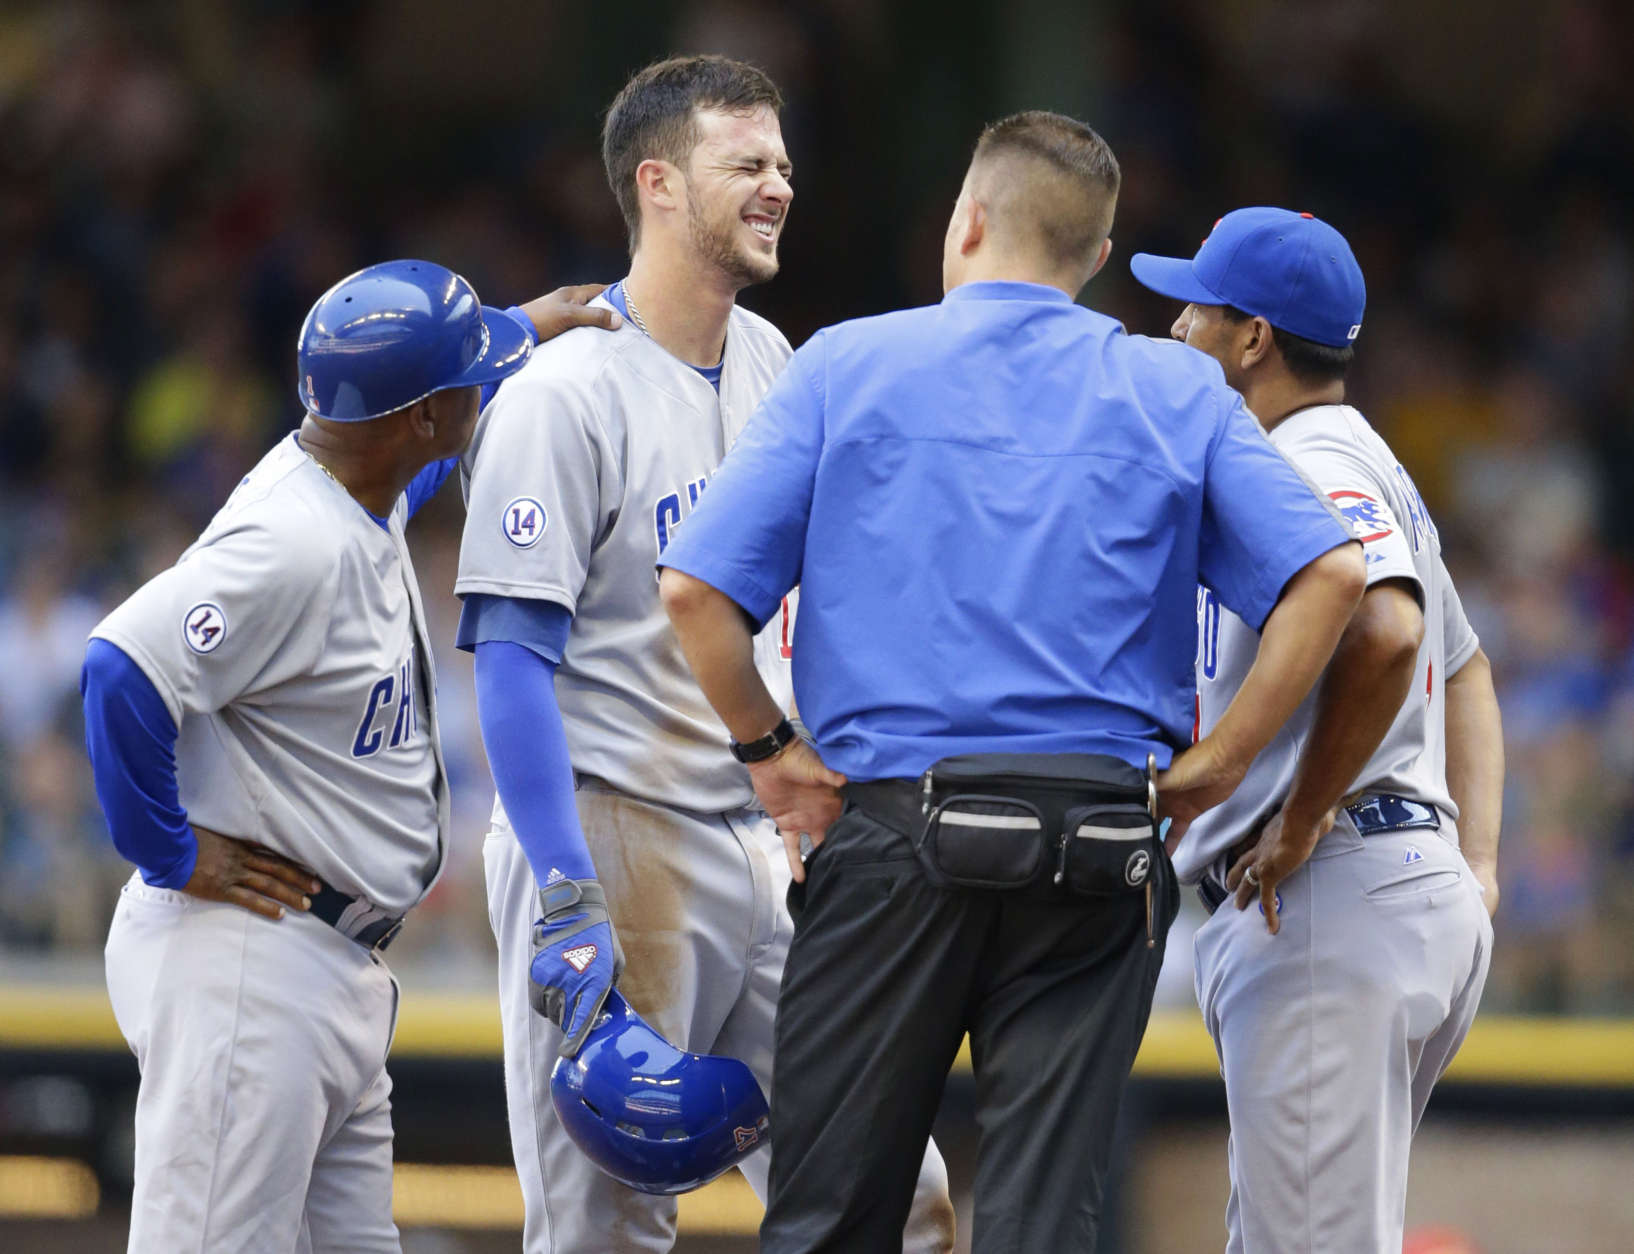 Chicago Cubs' Kris Bryant reacts at second base with third base coach Gary Jones, left a trainer and Dave Martinez, right, after Bryant was injured while sliding into second base during the fifth inning of a baseball game against the Milwaukee Brewers, Sunday, Aug. 2, 2015, in Milwaukee. Bryant was hurt on the play and left the game. (AP Photo/Jeffrey Phelps)